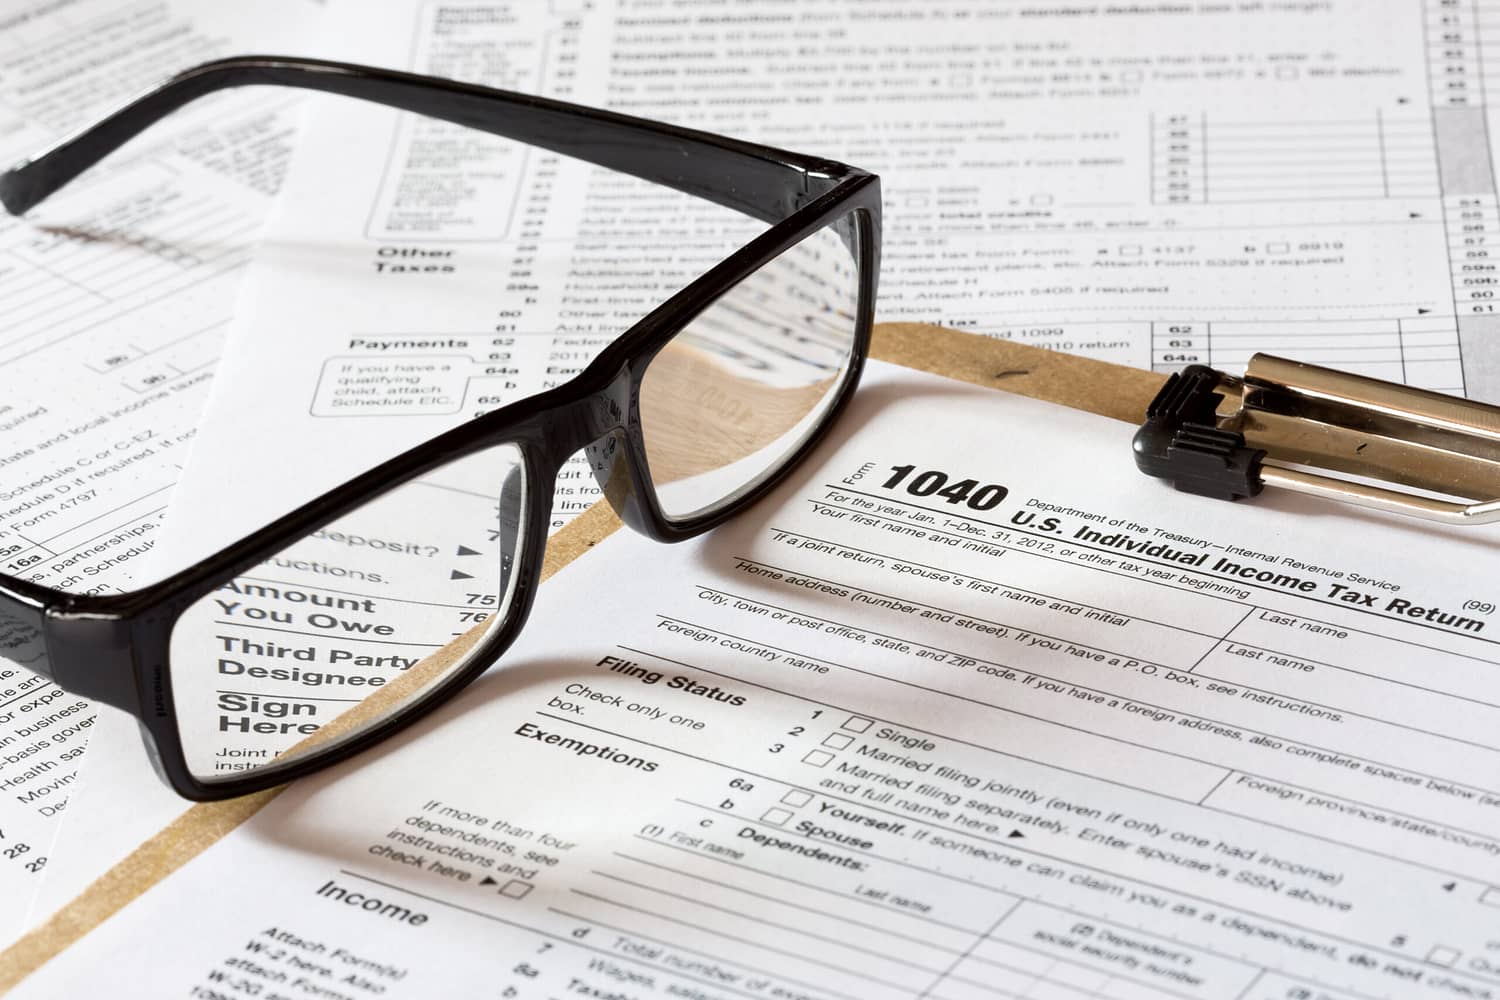 Self-Employed? Here’s What You Need to Know About Employment Taxes